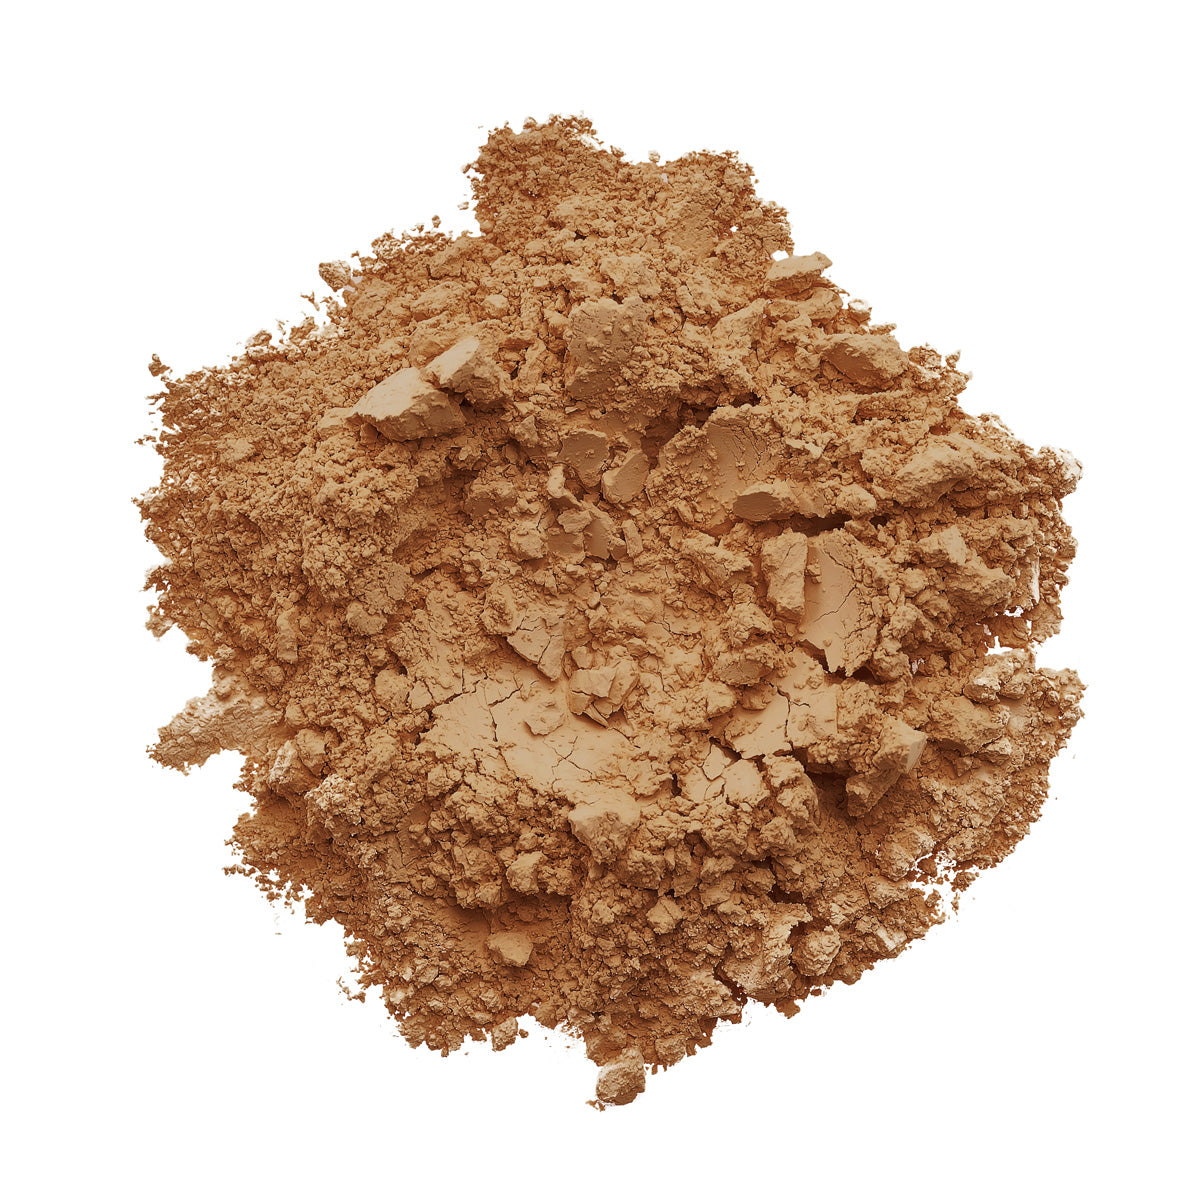 Loose Mineral Bronzer Sunkissed